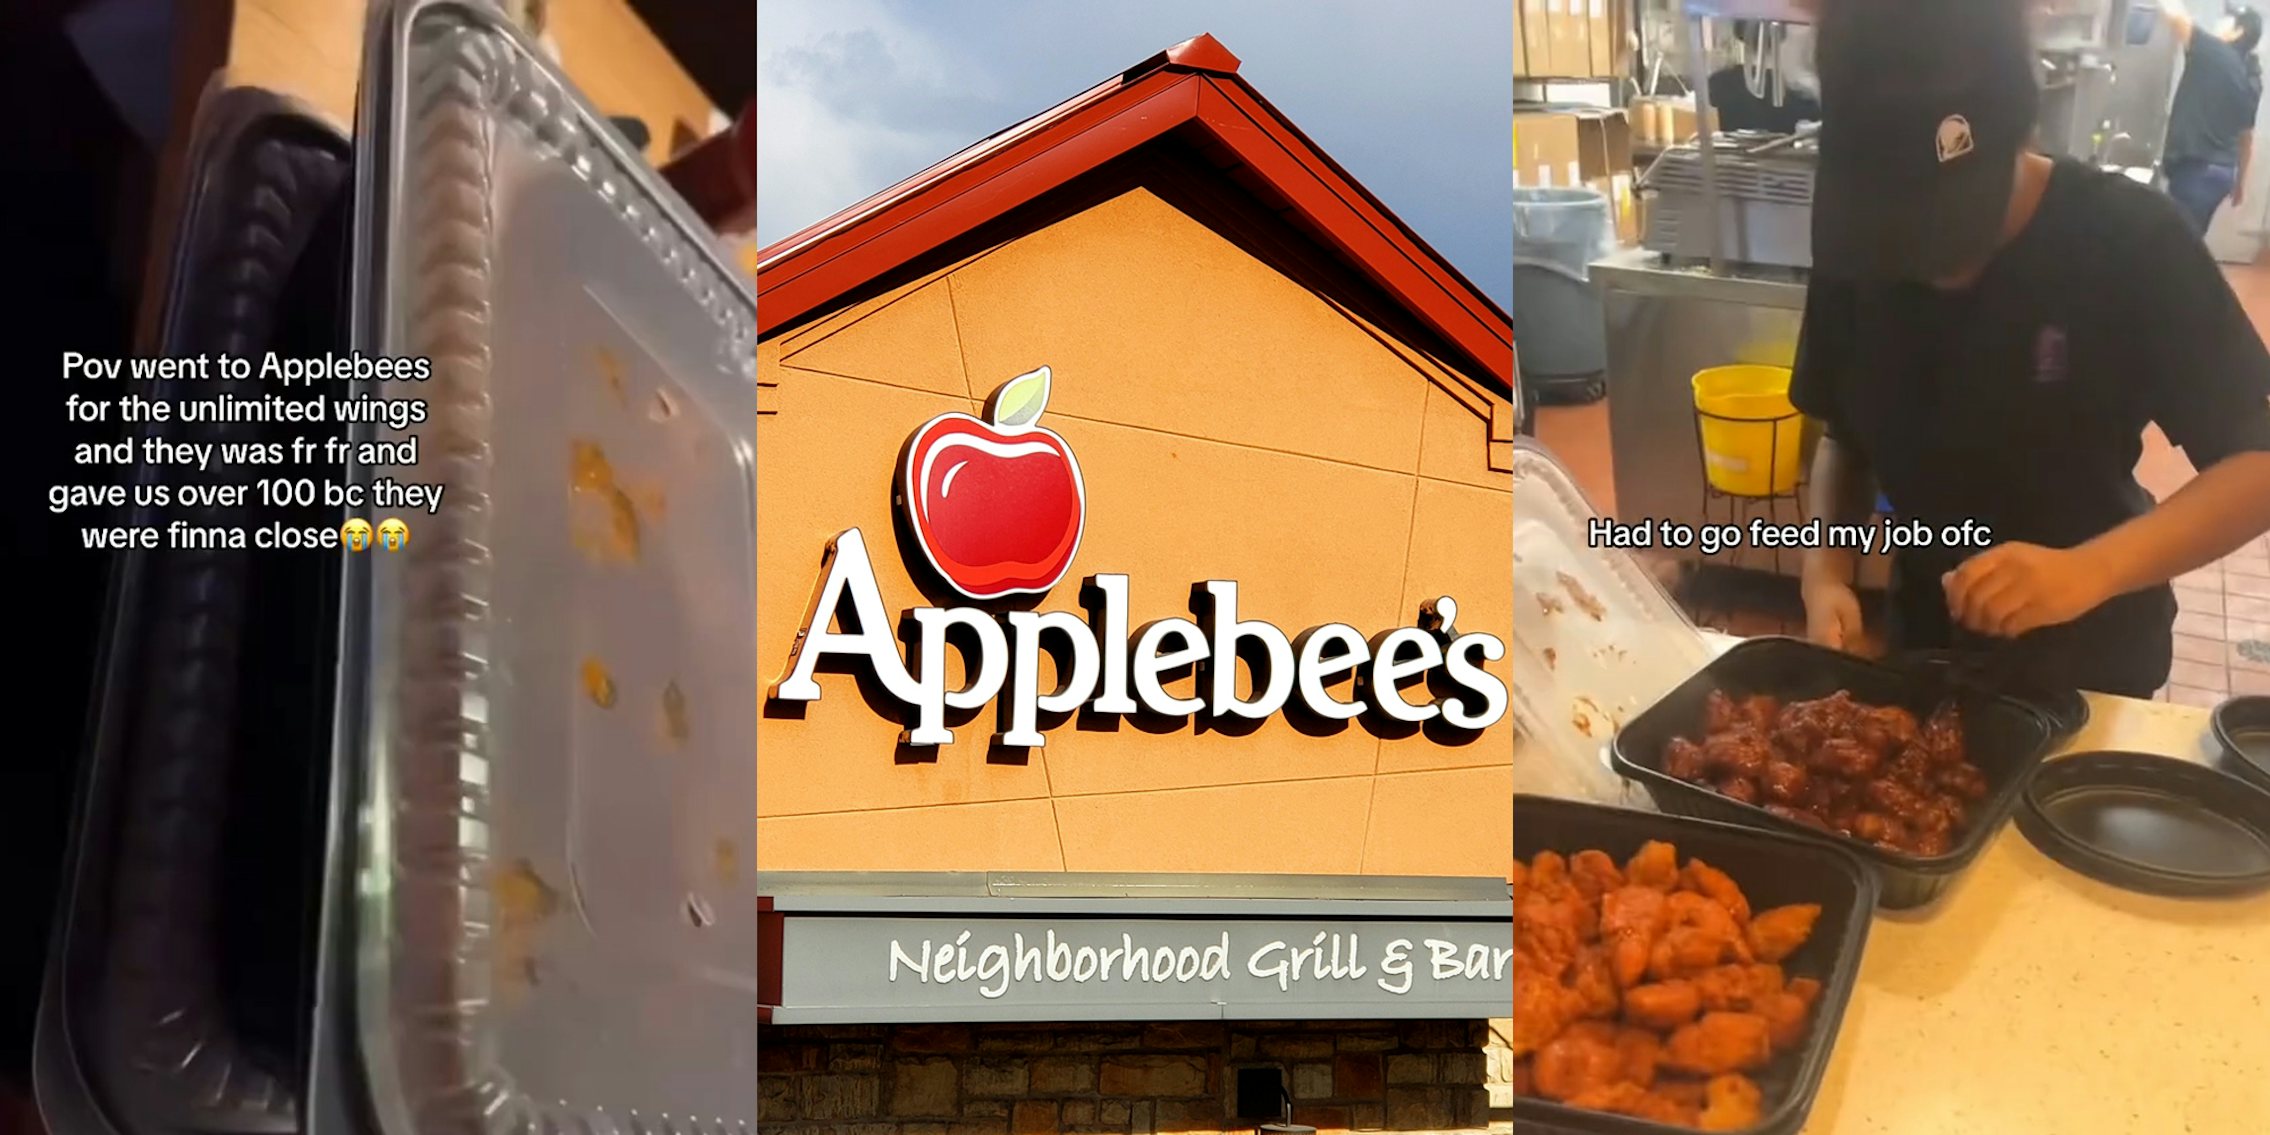 Applebee's wings with caption 'Pov went to Applebees for the unlimited wings and they was fr fr and gave us over 100 bc they were finna close' (l) Applebee's sign on building (c) worker getting Applebee's wings with caption 'Had to go feed my job ofc' (r)